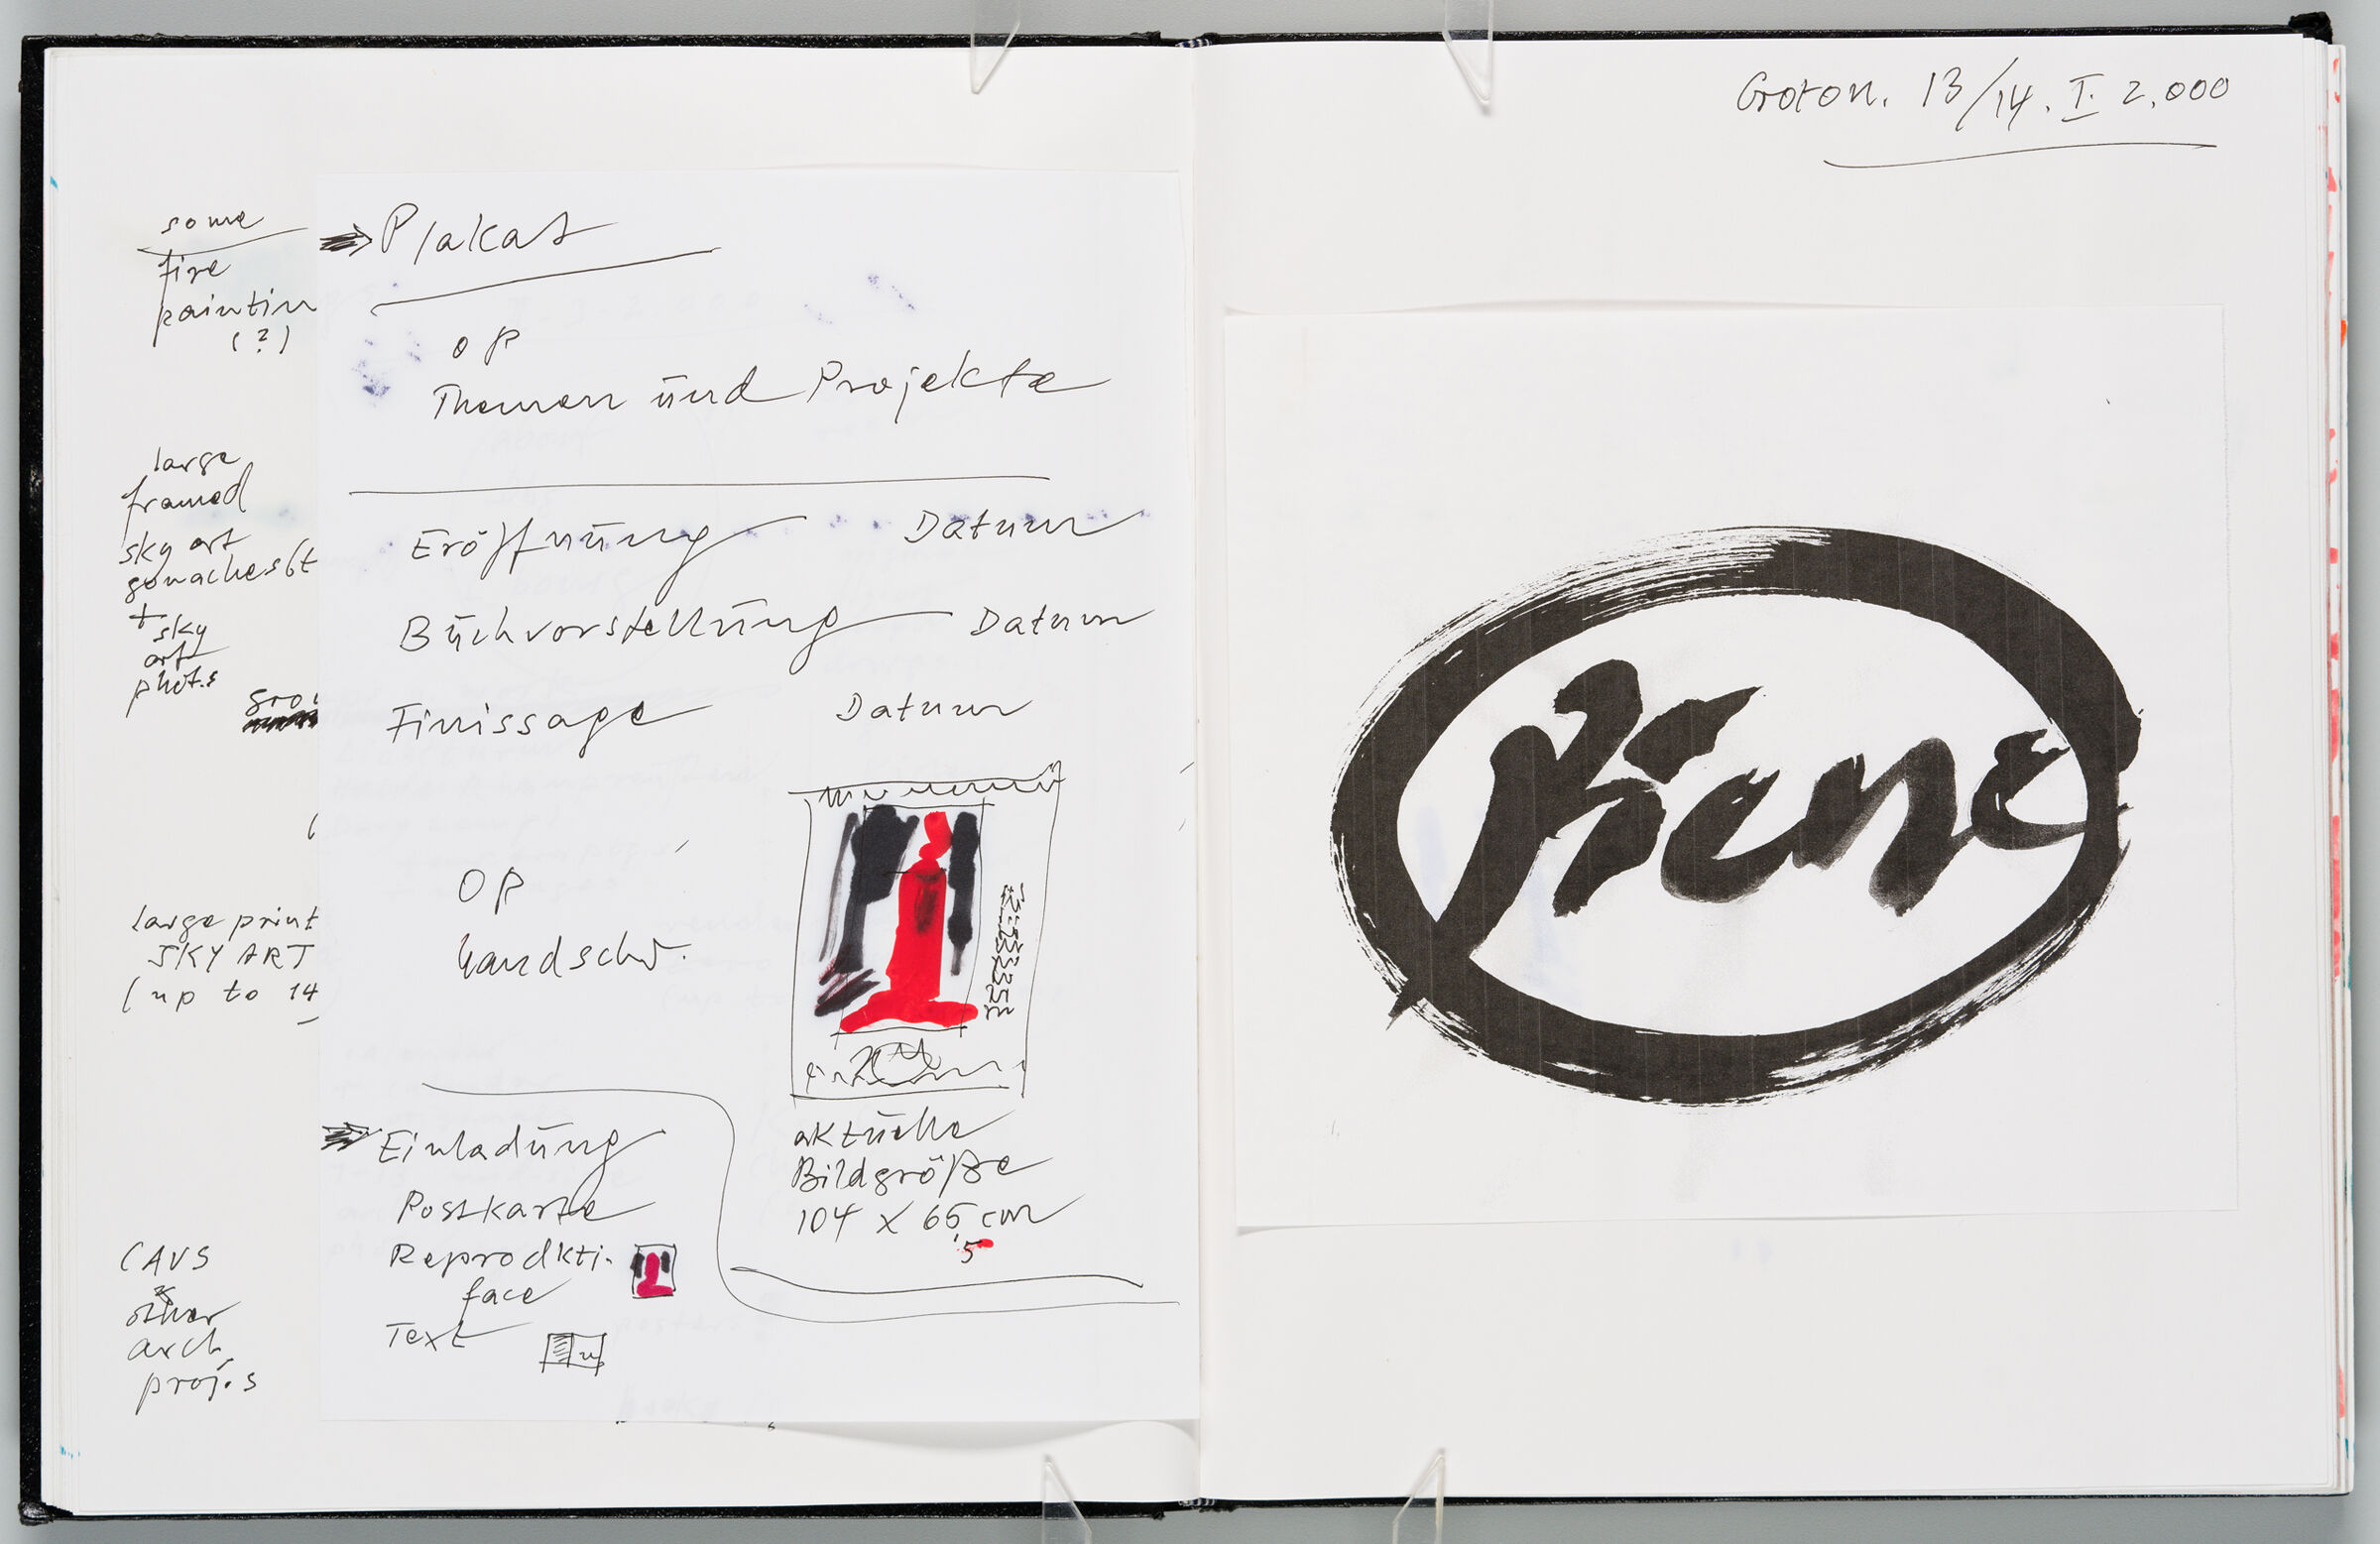 Untitled (Notes And Adhered Sheet With Notes On Exhibition Preparations, Left Page); Untitled (Adhered Sheet With Signature, Right Page)